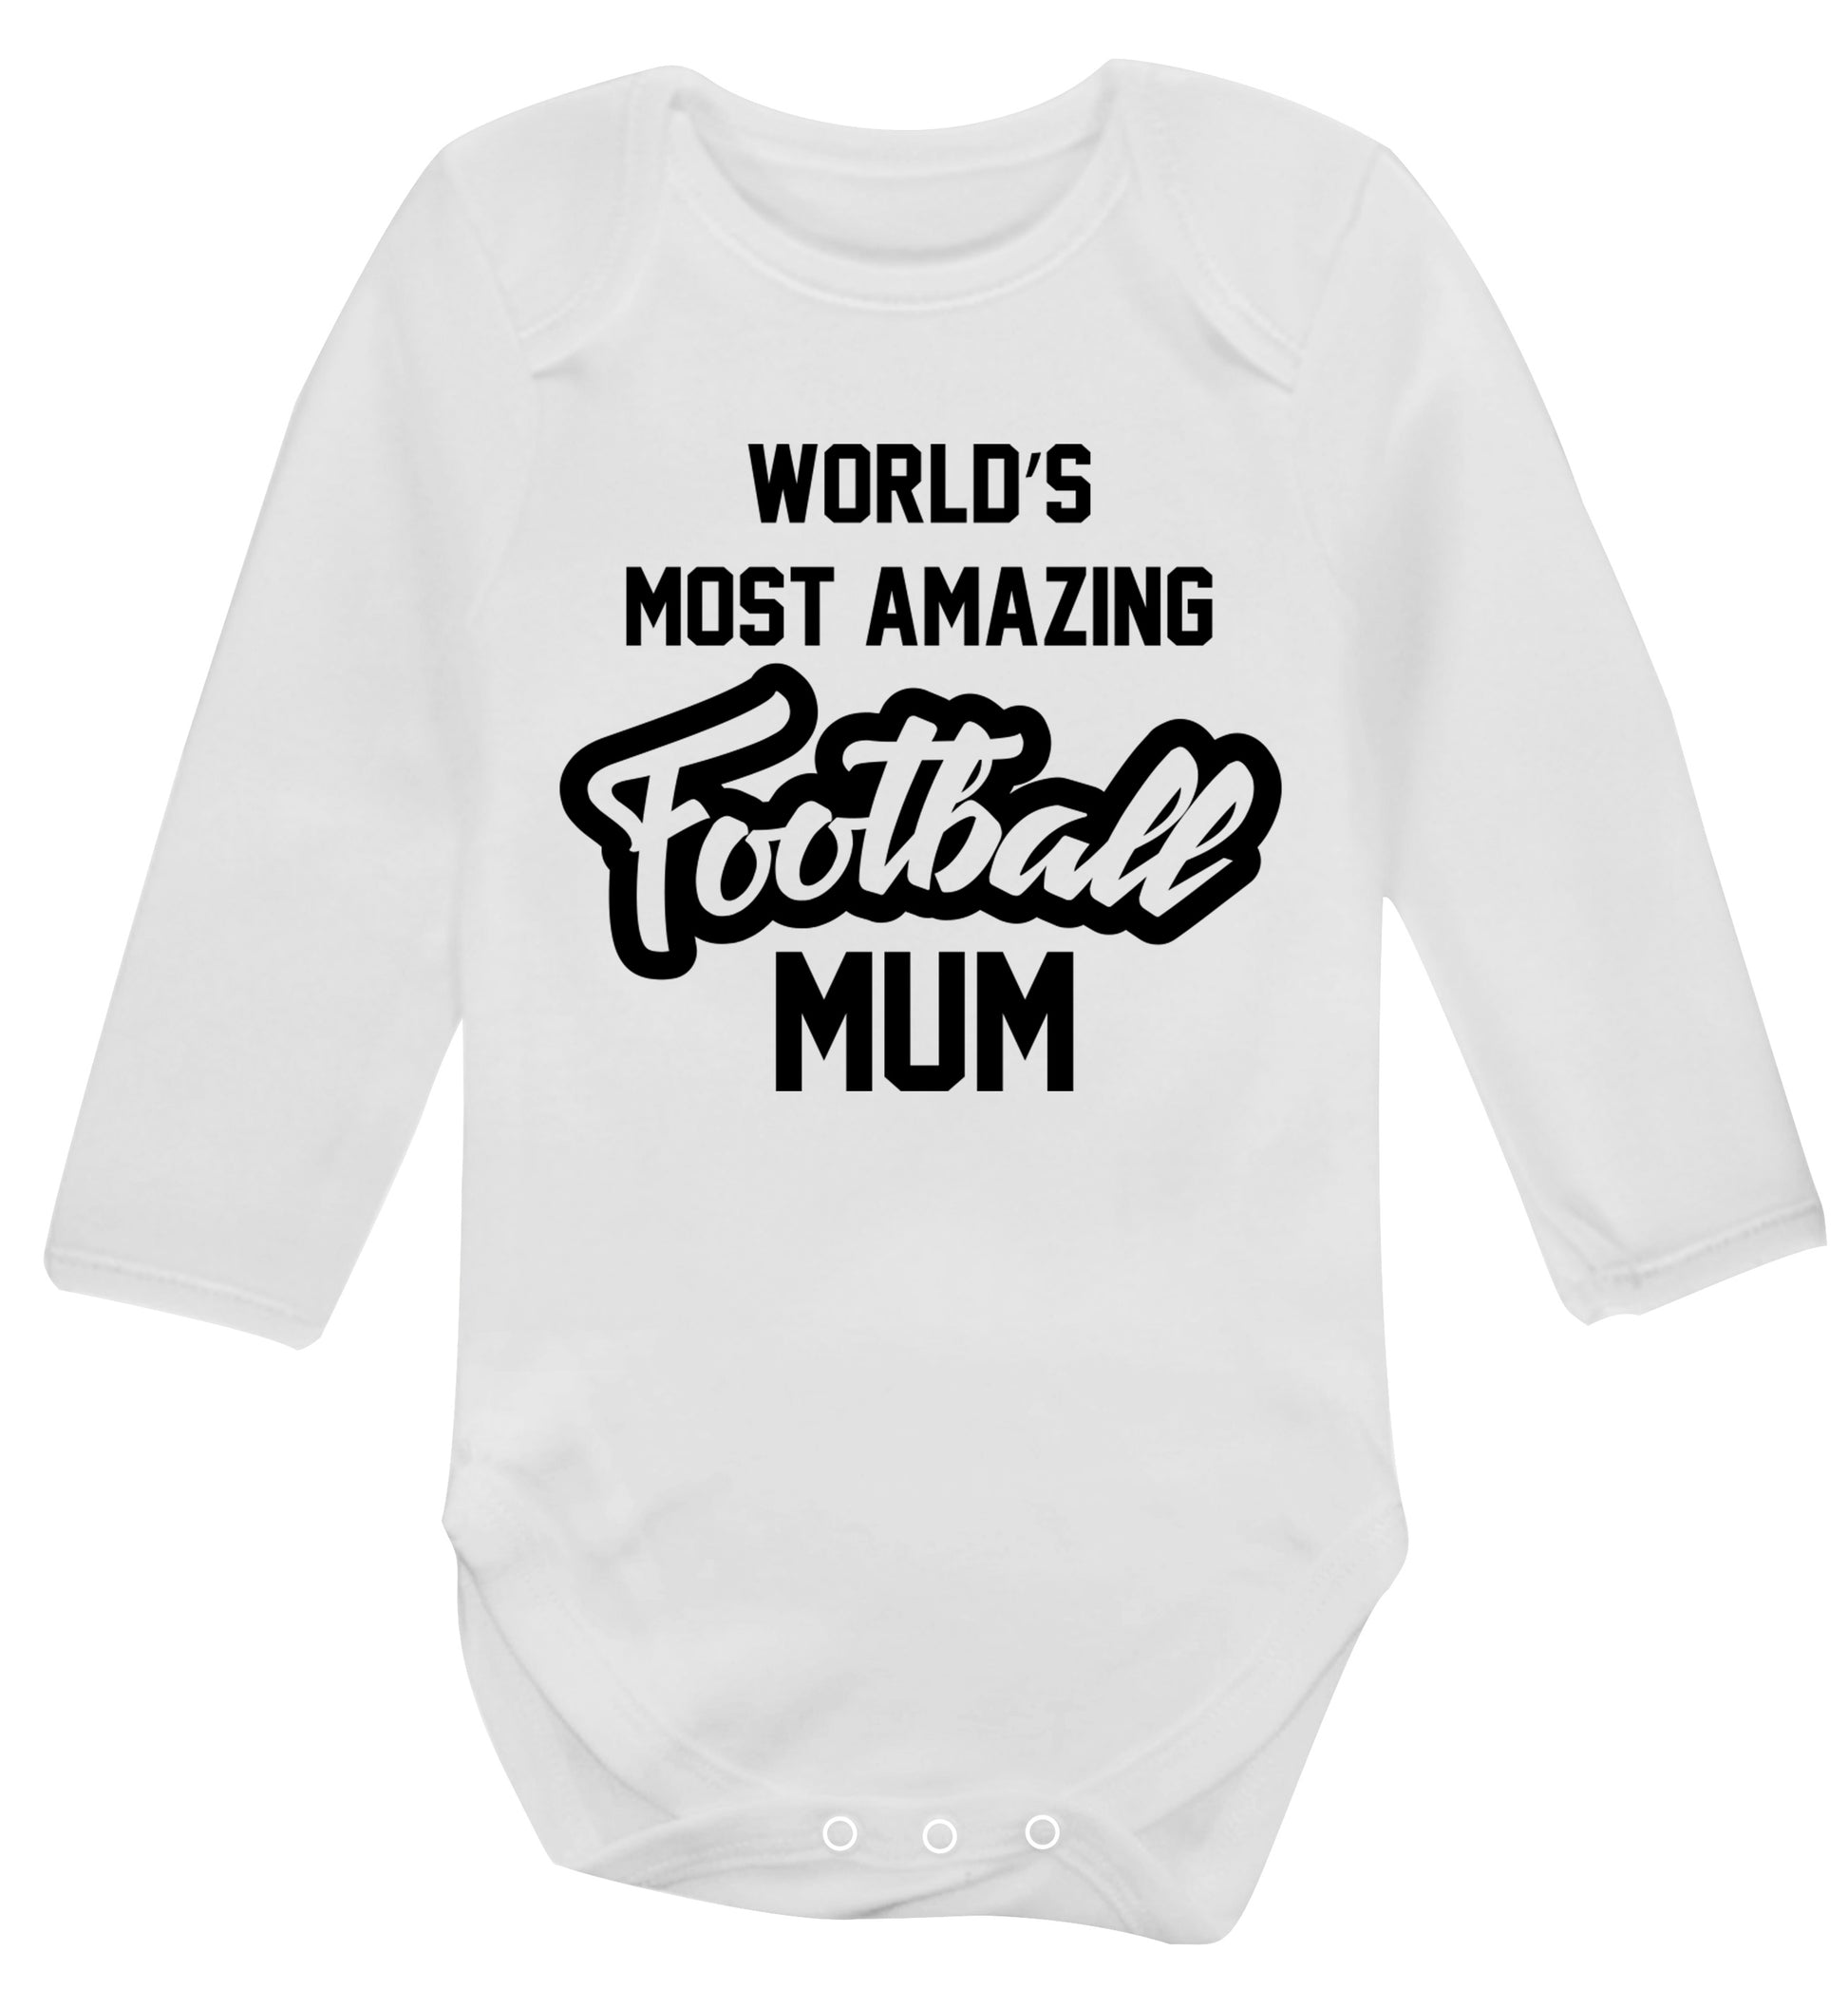 Worlds most amazing football mum Baby Vest long sleeved white 6-12 months